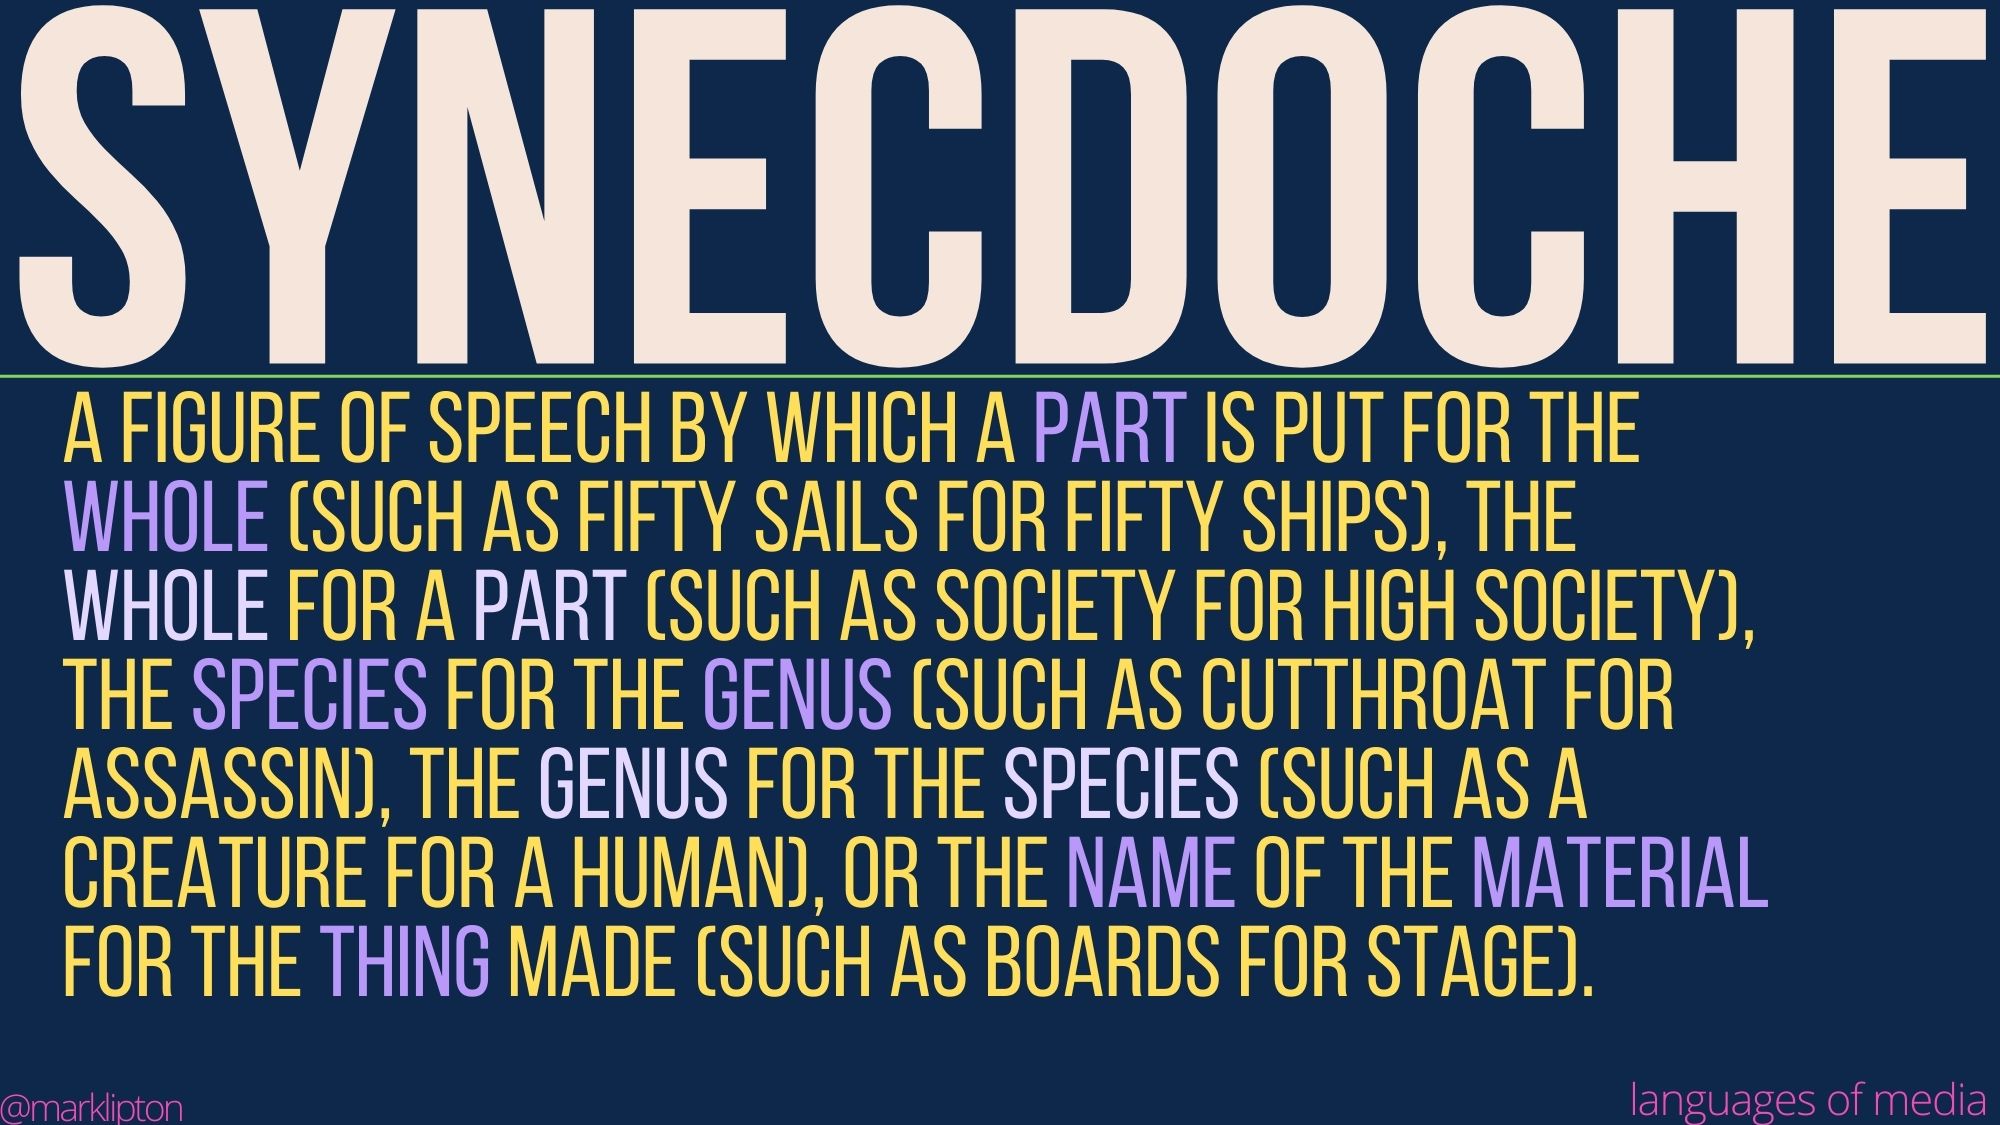 image: SYNECDOCHE A figure of speech by which a part is put for the whole (such as fifty sails for fifty ships), the whole for a part (such as society for high society), the species for the genus (such as cutthroat for assassin), the genus for the species (such as a creature for a man), or the name of the material for the thing made (such as boards for stage).